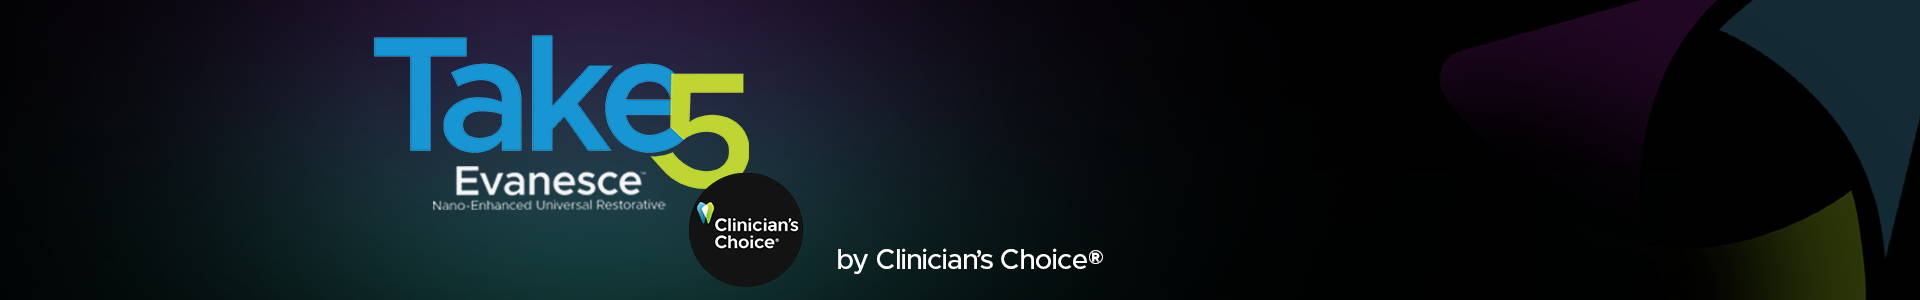 blog banner with Take 5 logo and Clinicians Choice logo